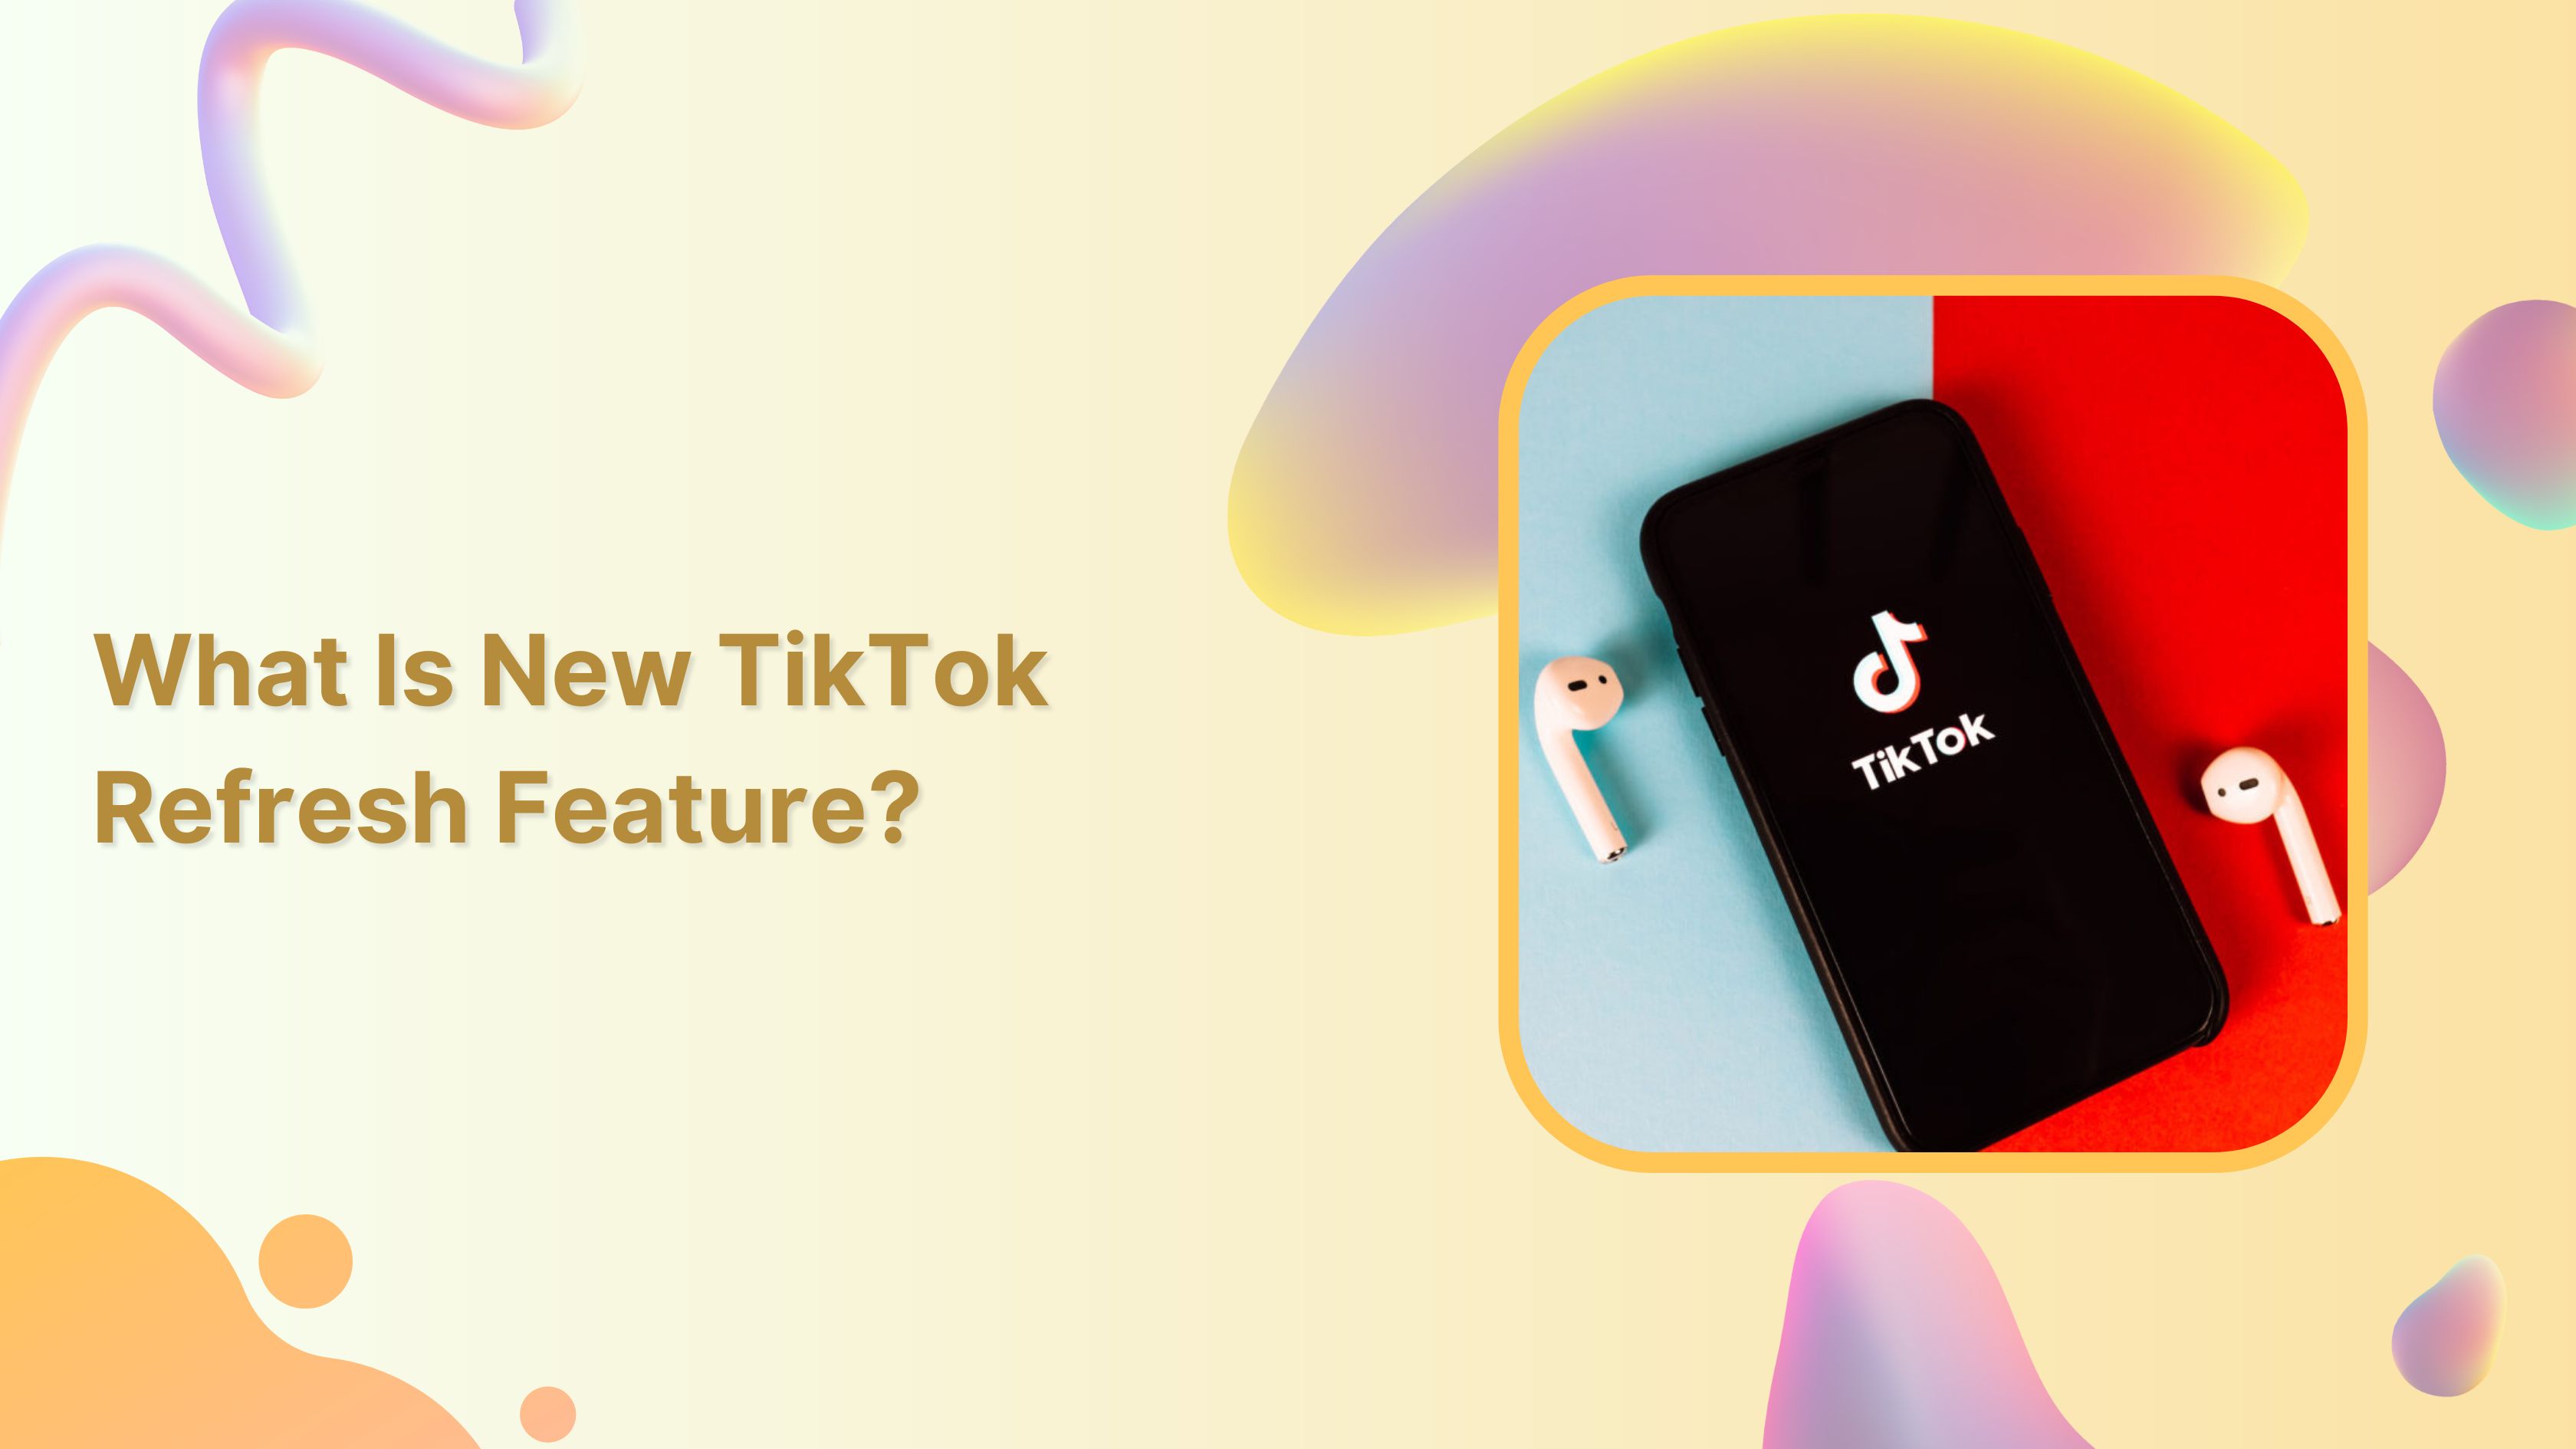 What Is New TikTok Refresh Feature & How Does It Work?